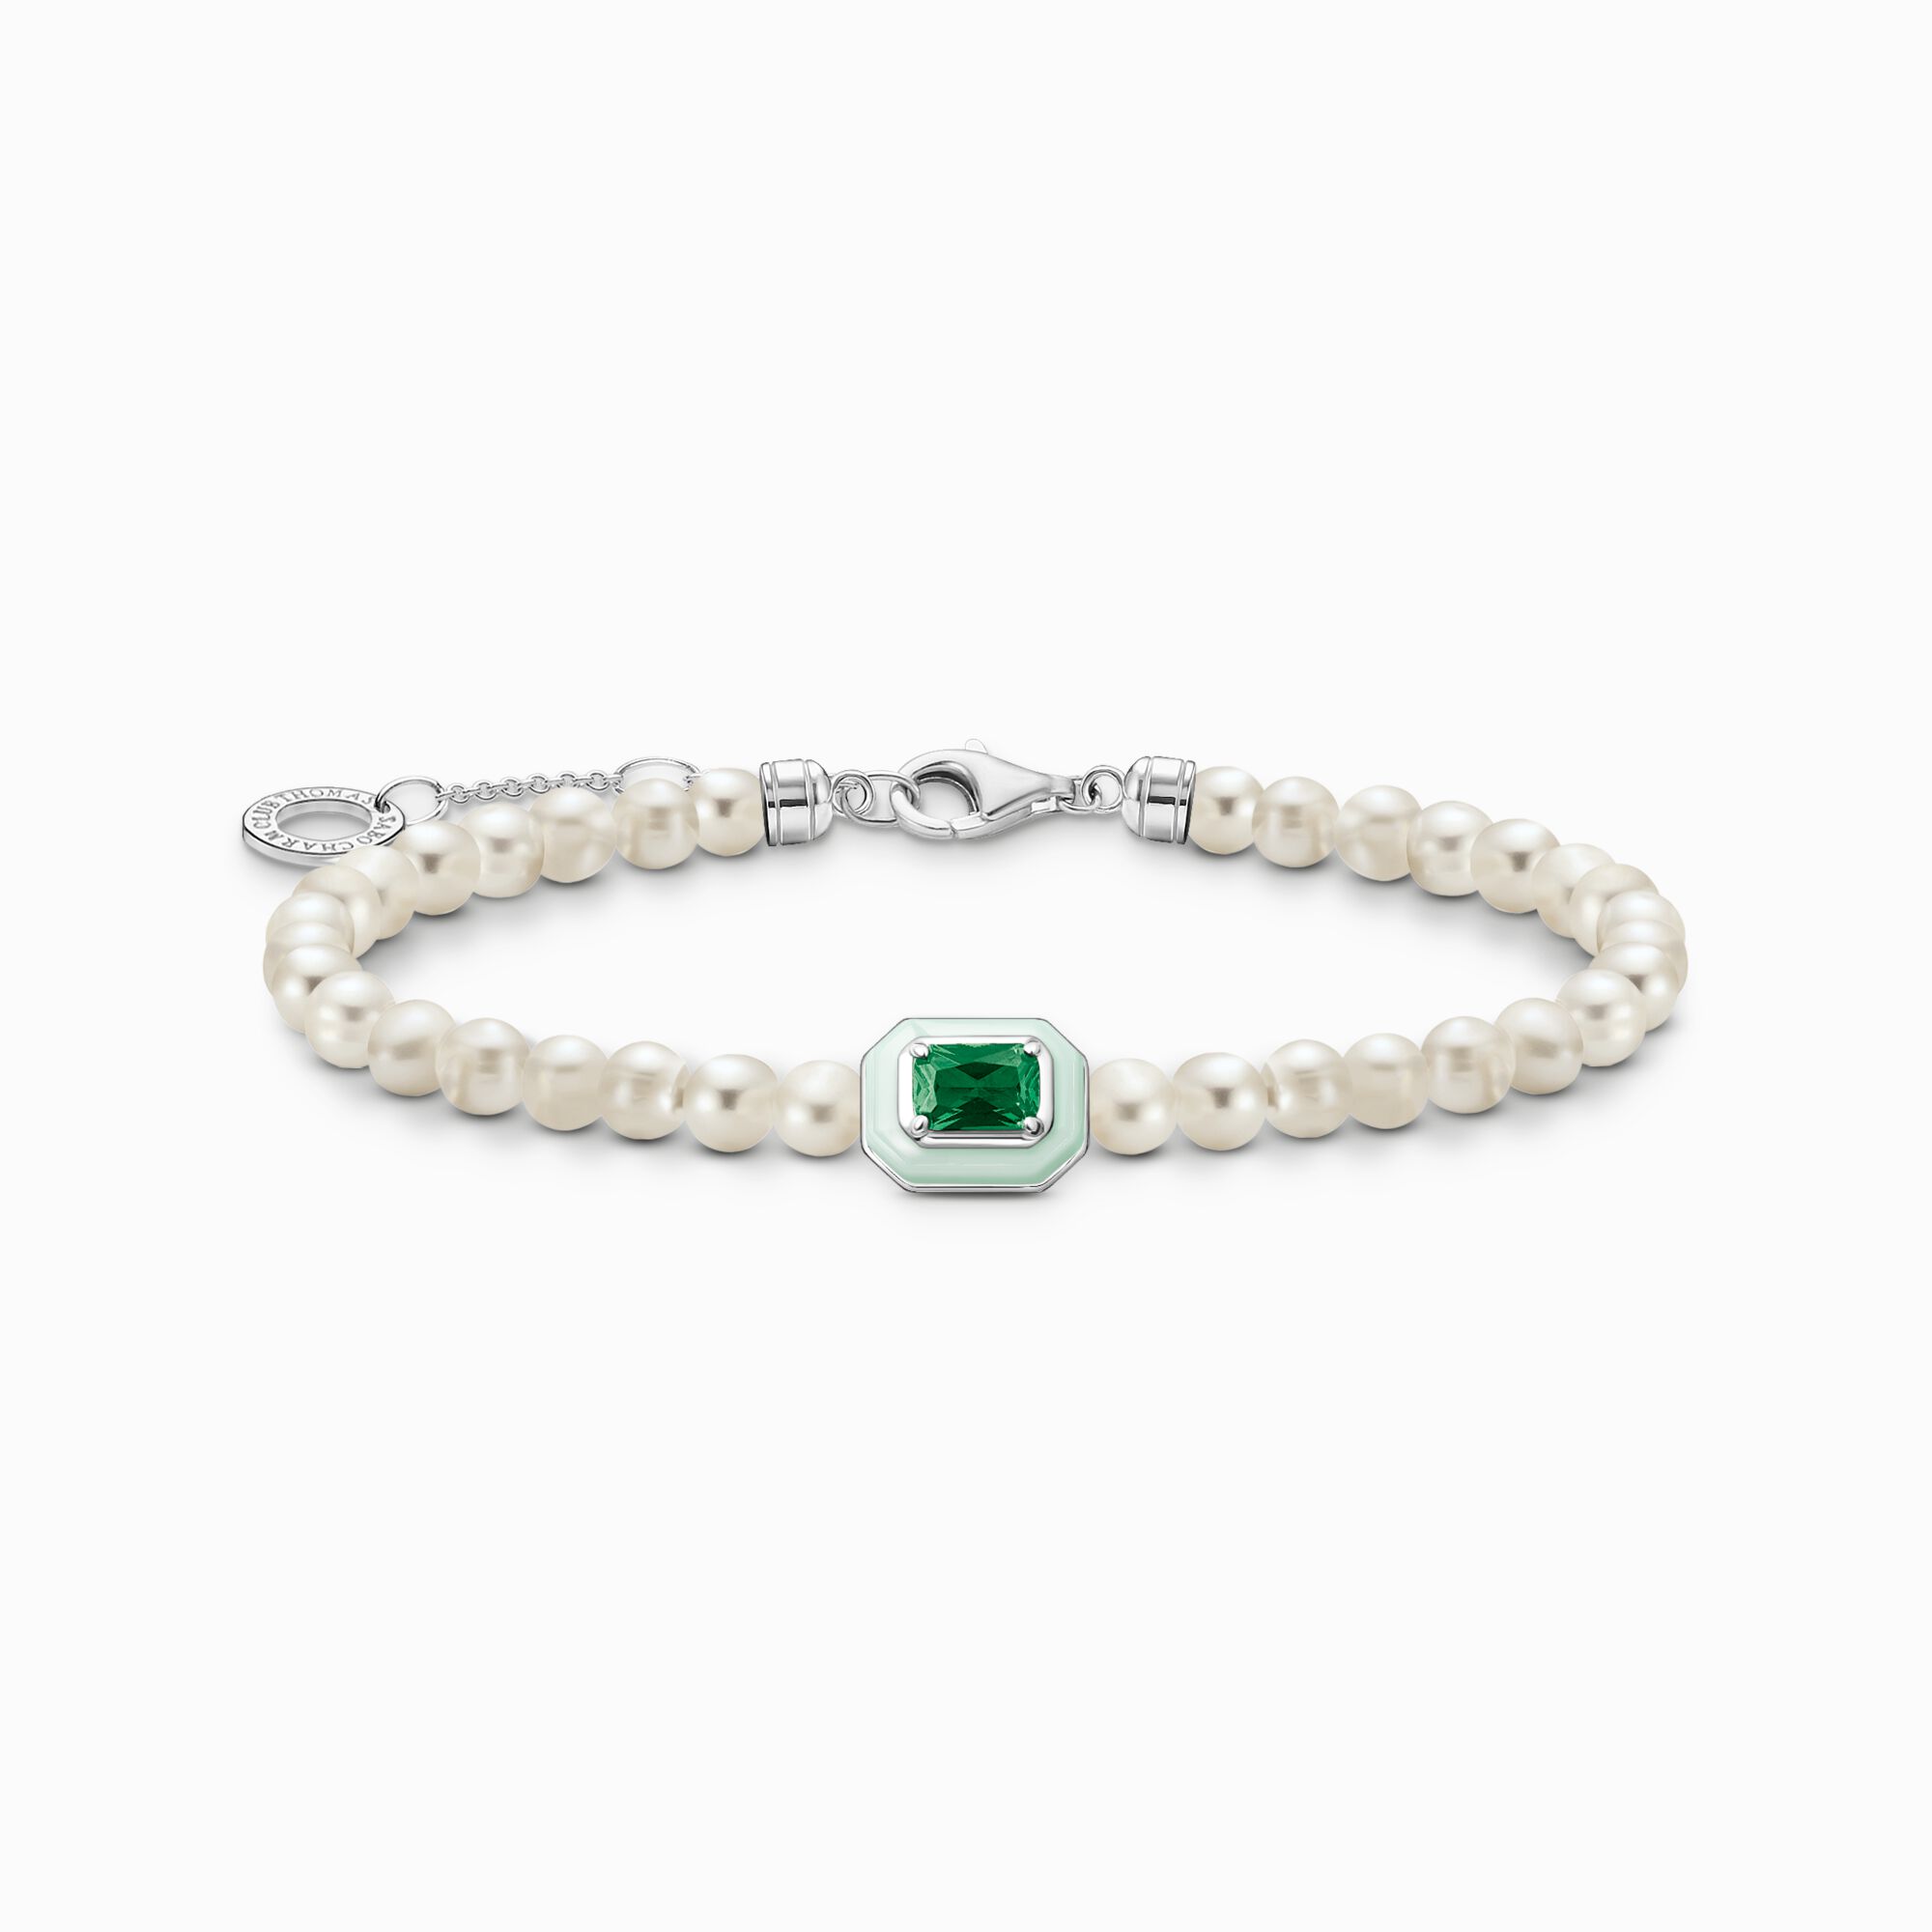 Bracelet with white pearls and green stone from the Charming Collection collection in the THOMAS SABO online store